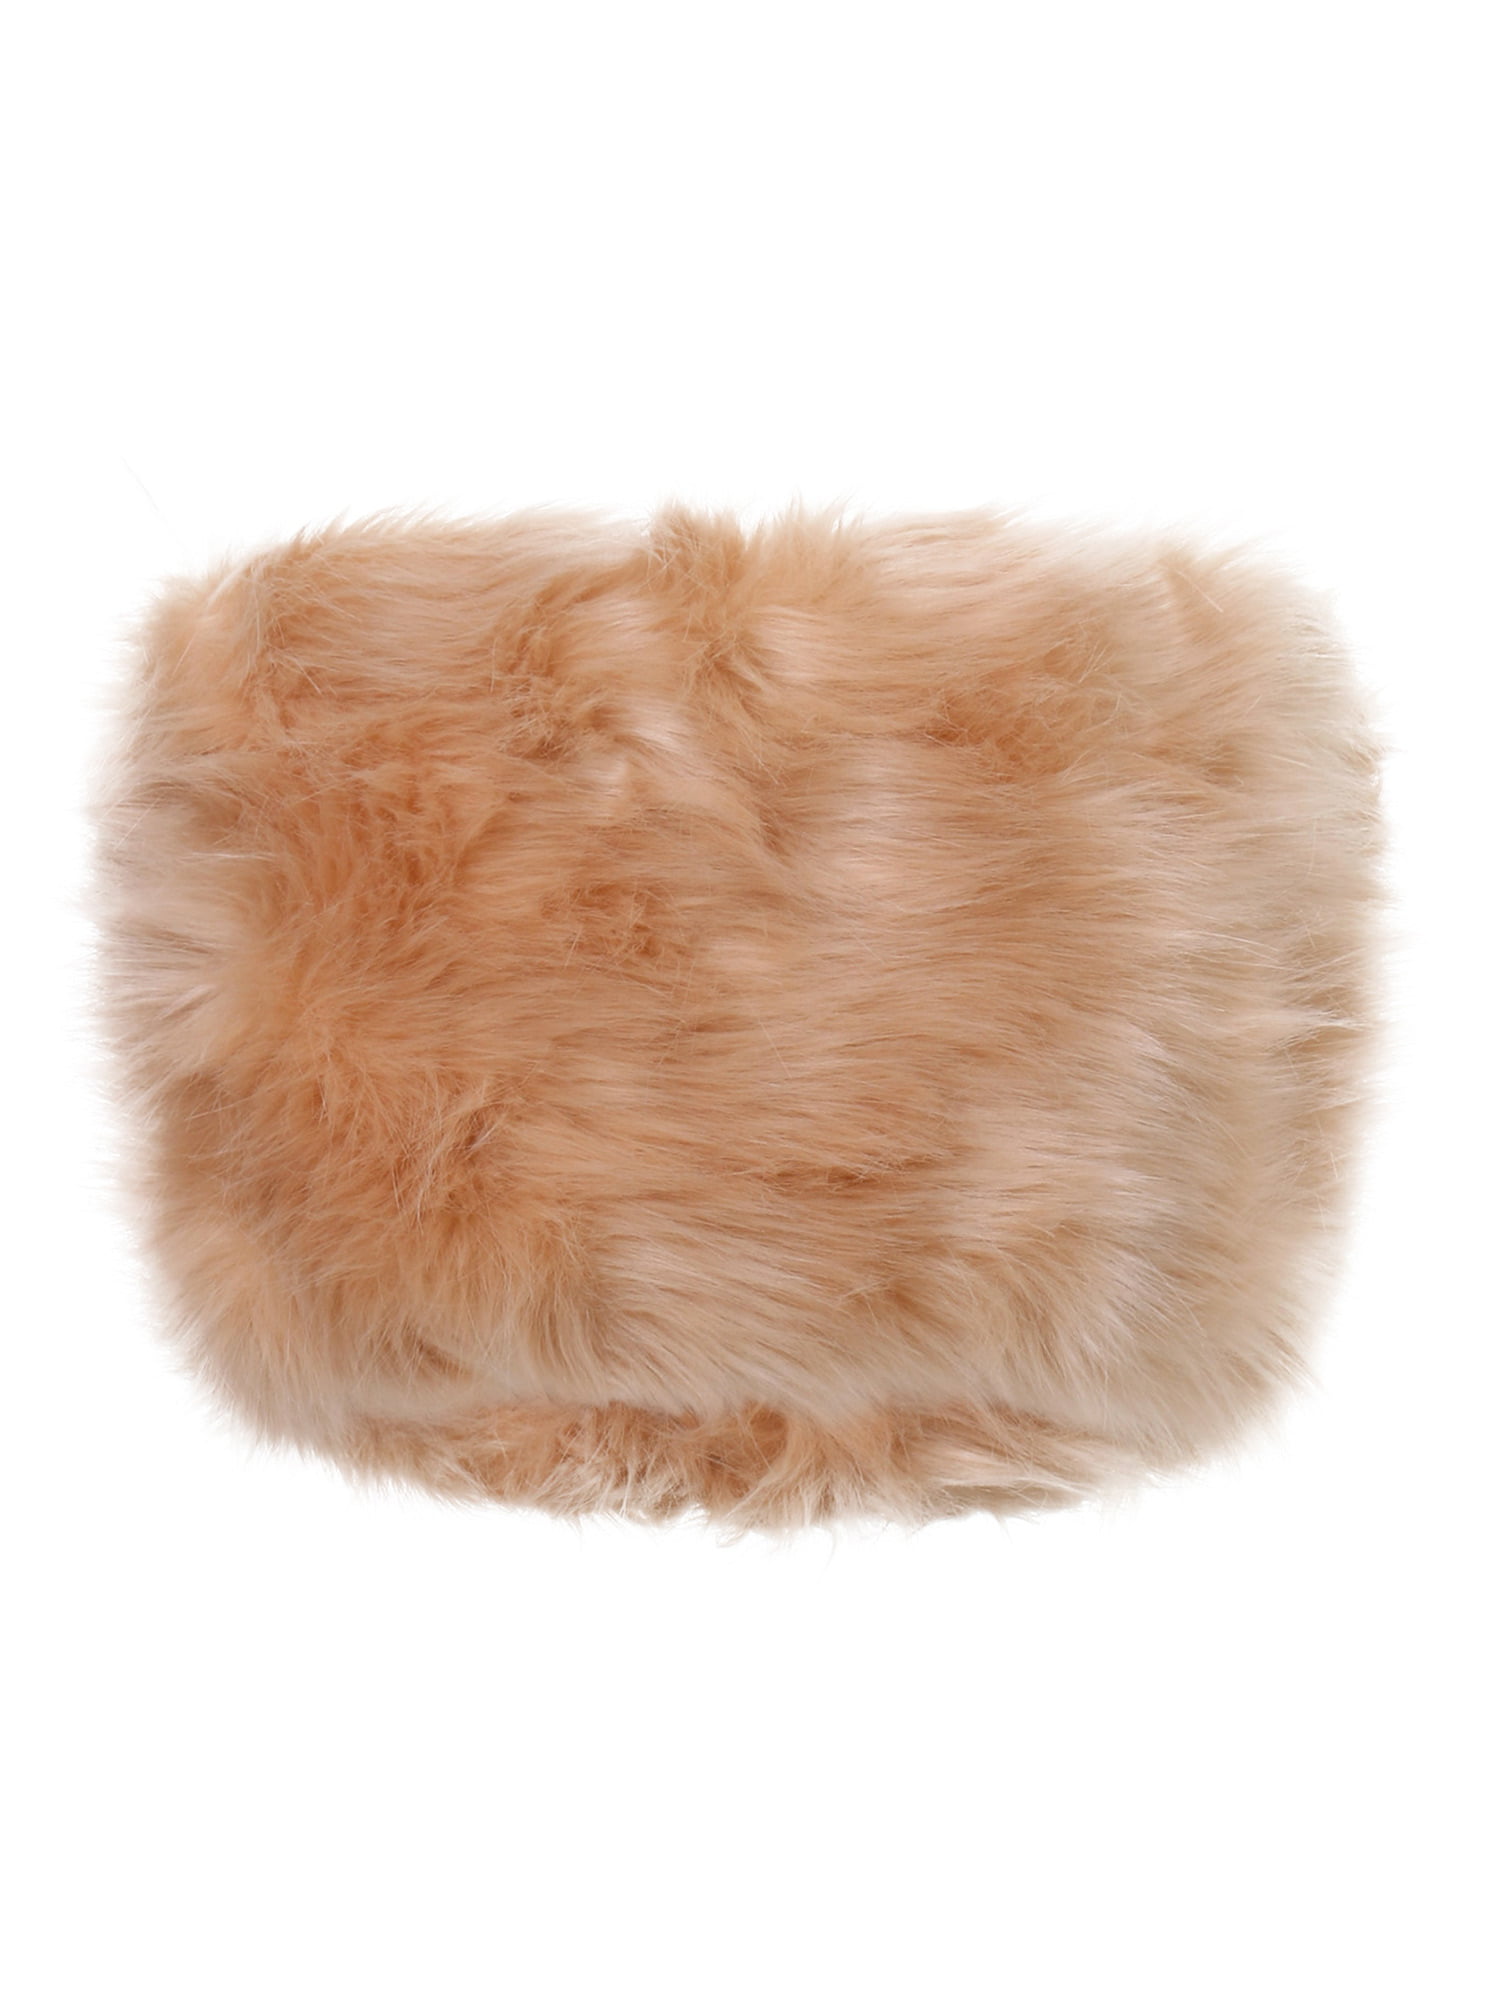 BackTrack — LV Tube Top with Fur Jacket ( Early Access 